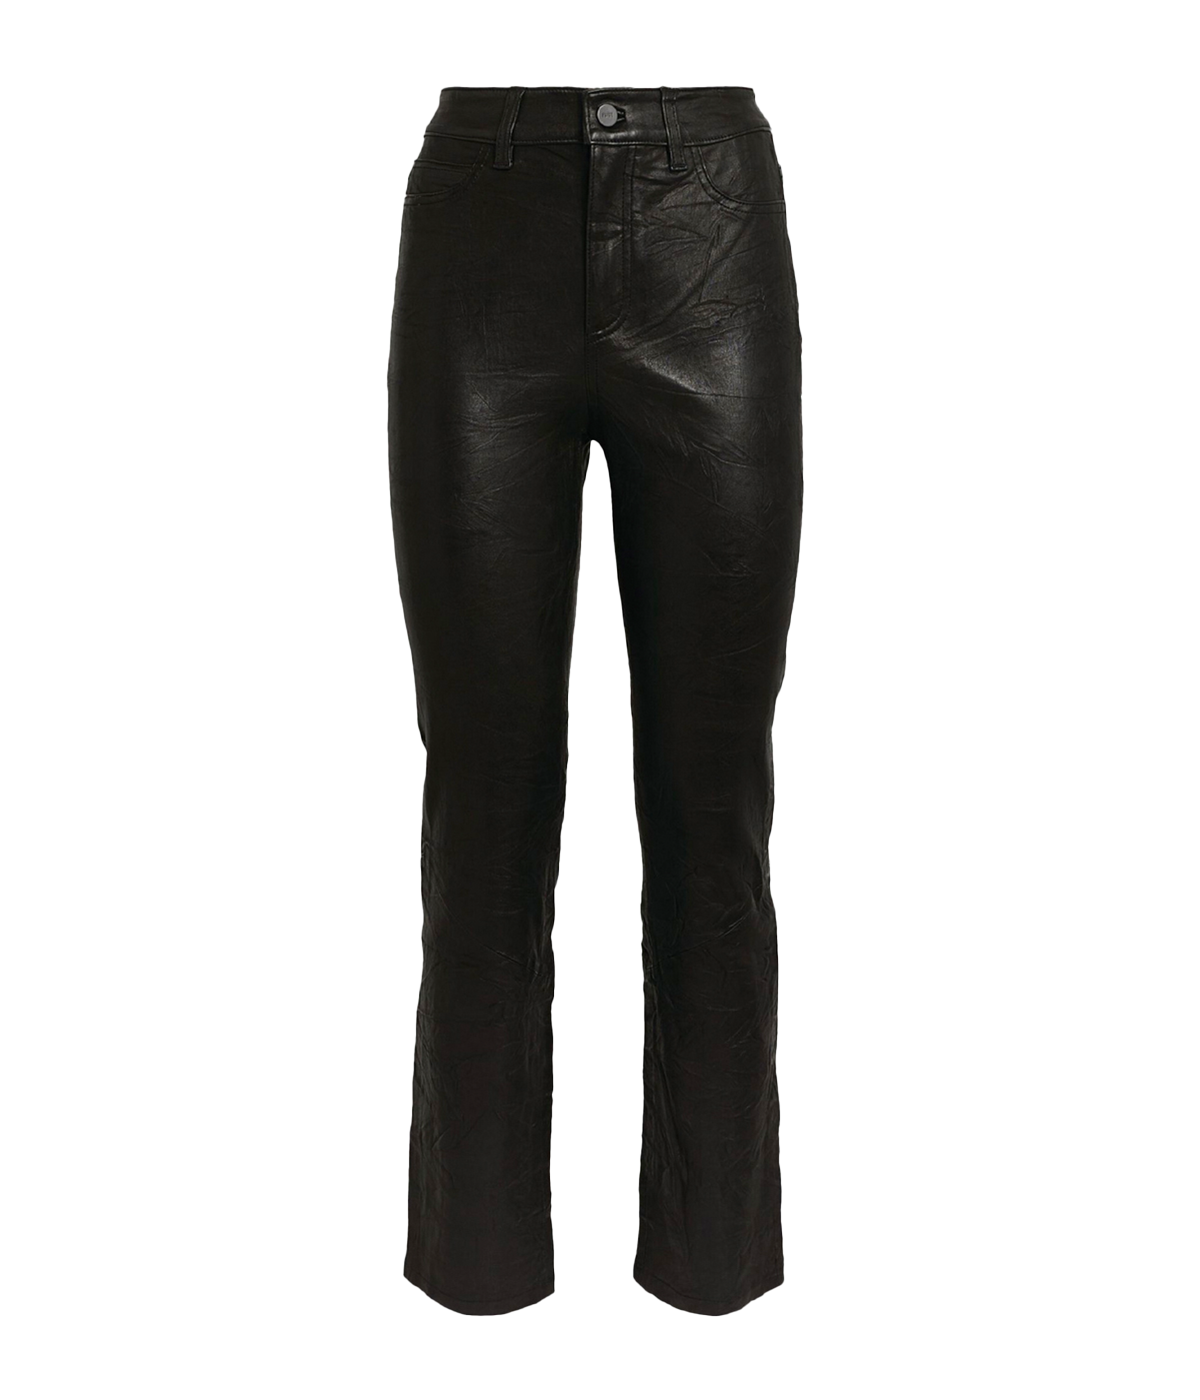 Cindy Leather Pants in Black